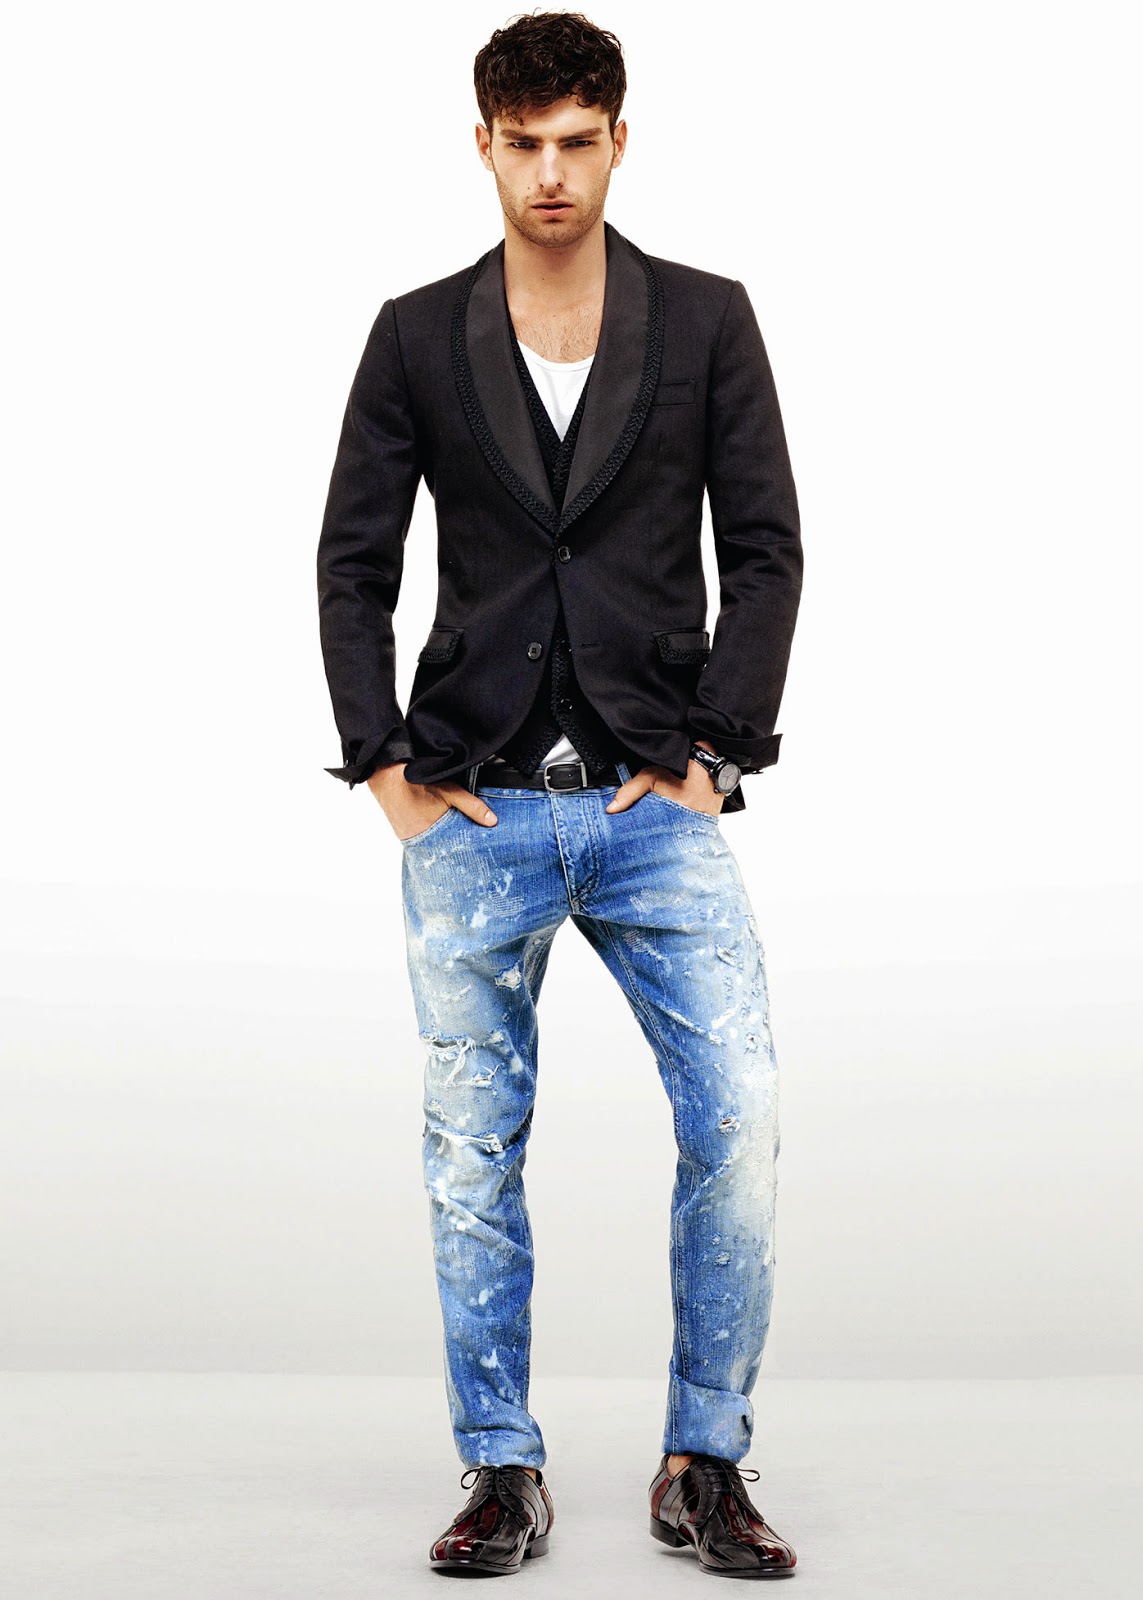 What to wear: Great way to pair destroyed jeans with a black blazer